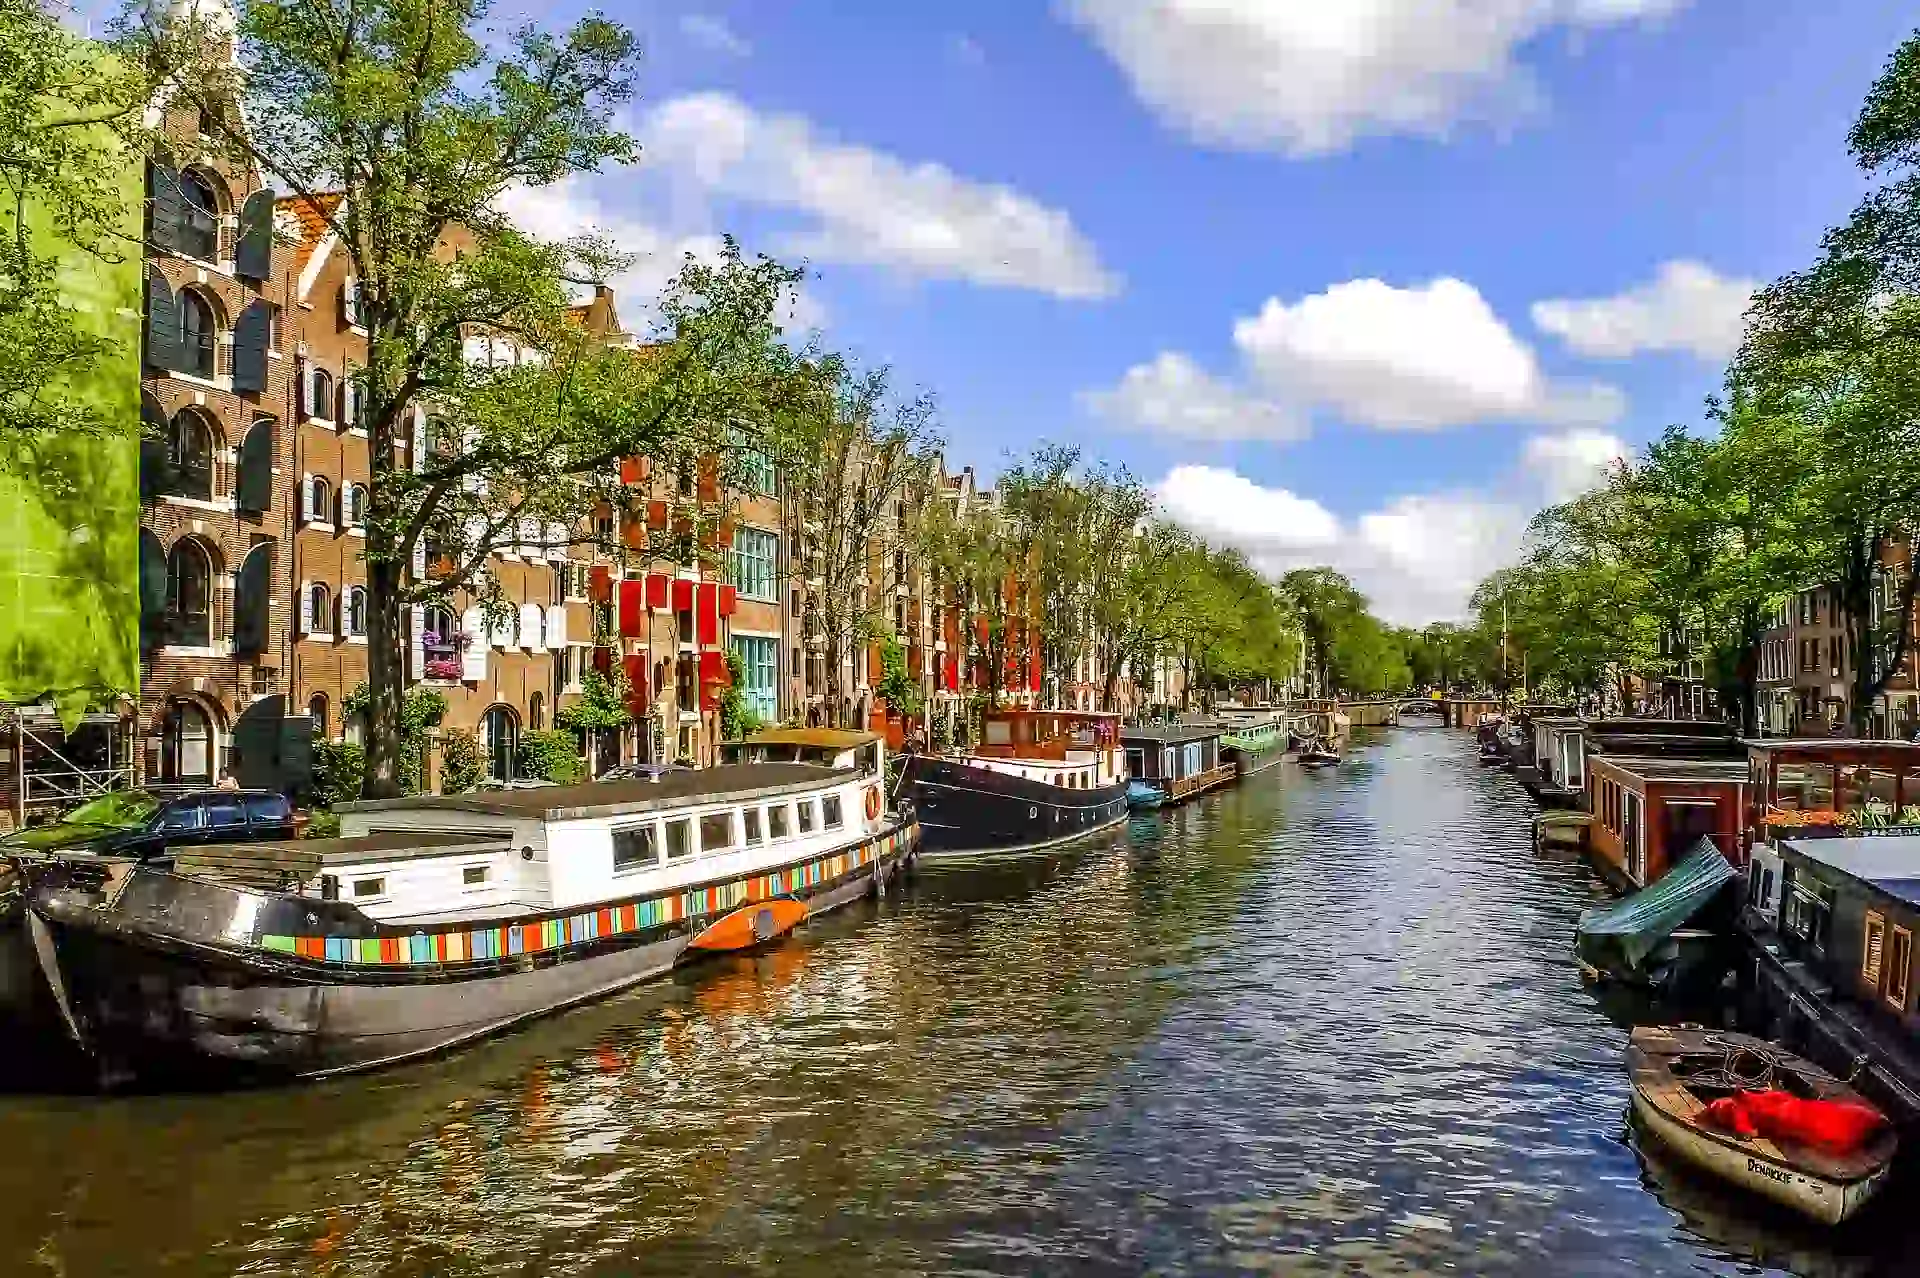 Day 4 - Amsterdam canal cruise, Windmills Tour and many more